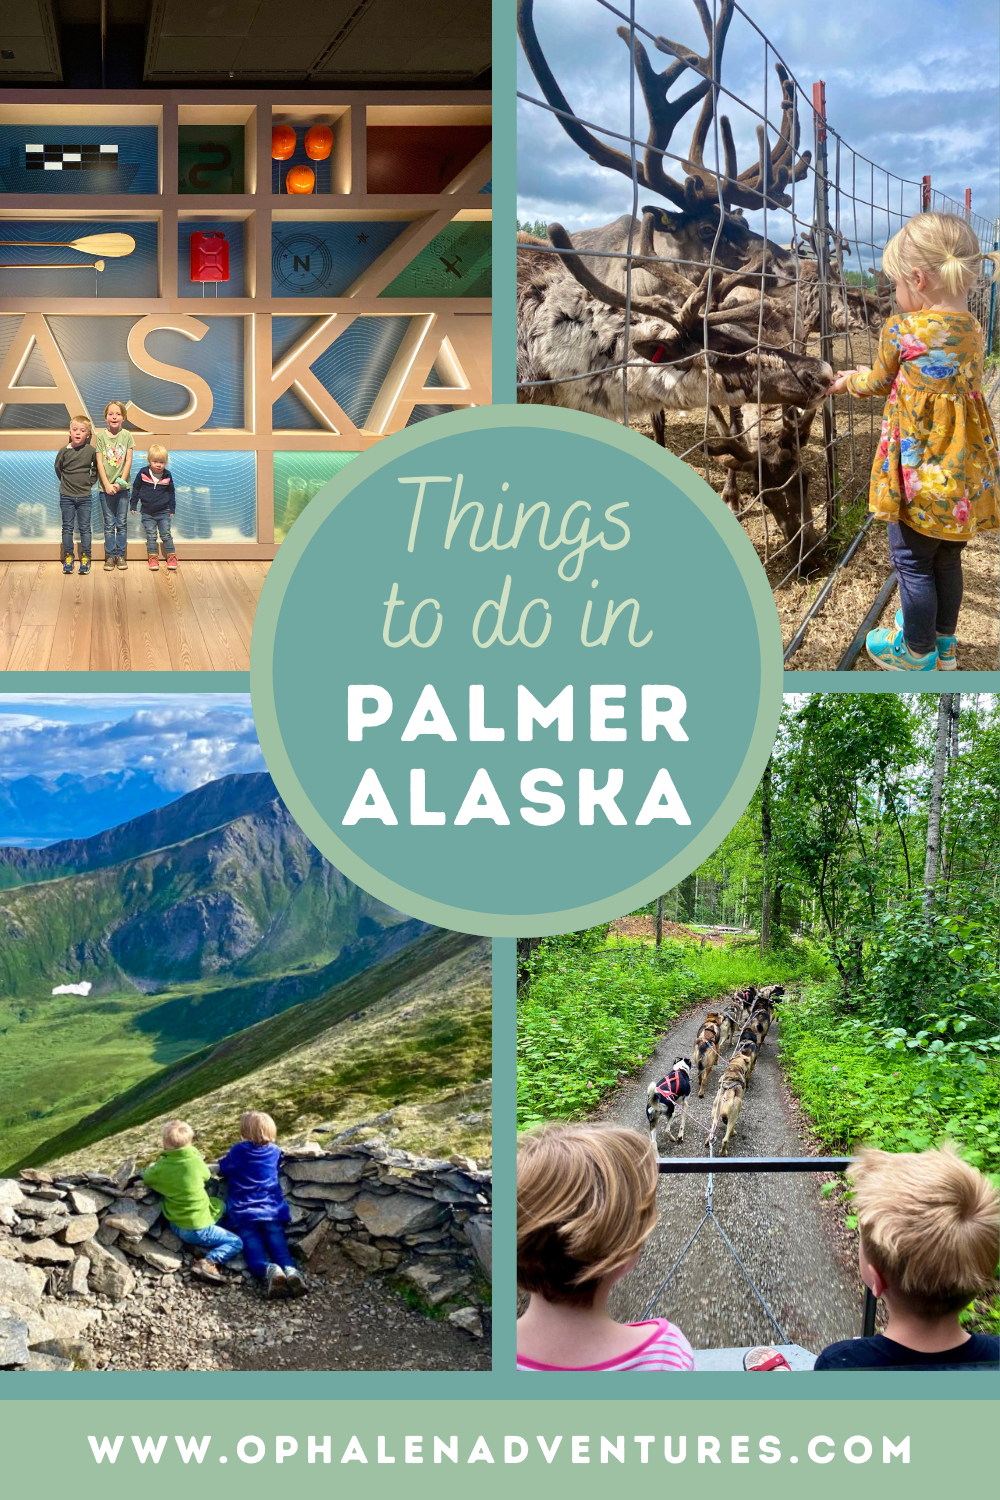 Things to do in Palmer Alaska: Explore This Remarkable Place!